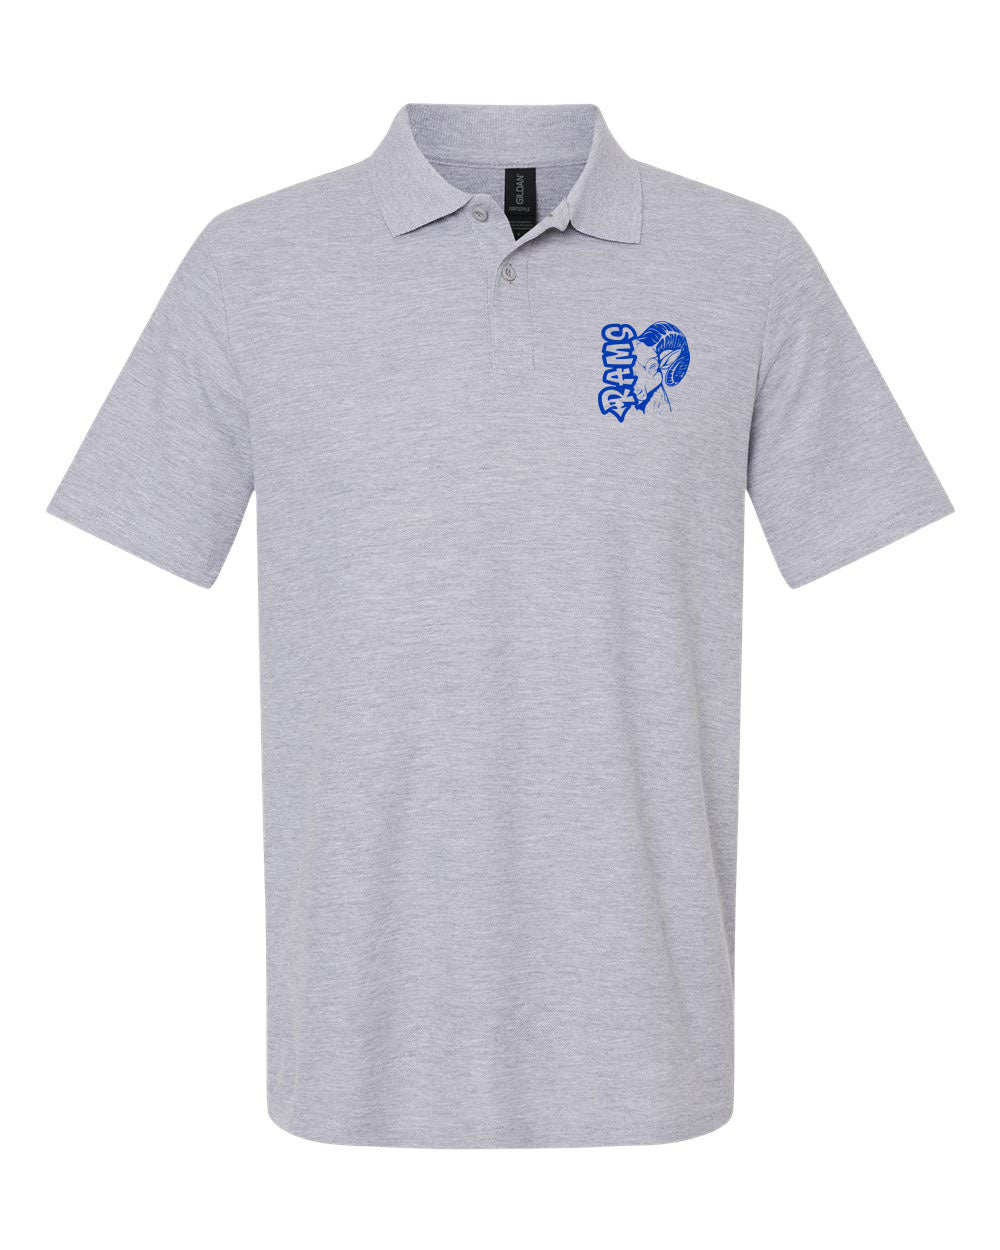 Sussex Middle design 7 Polo T-Shirt